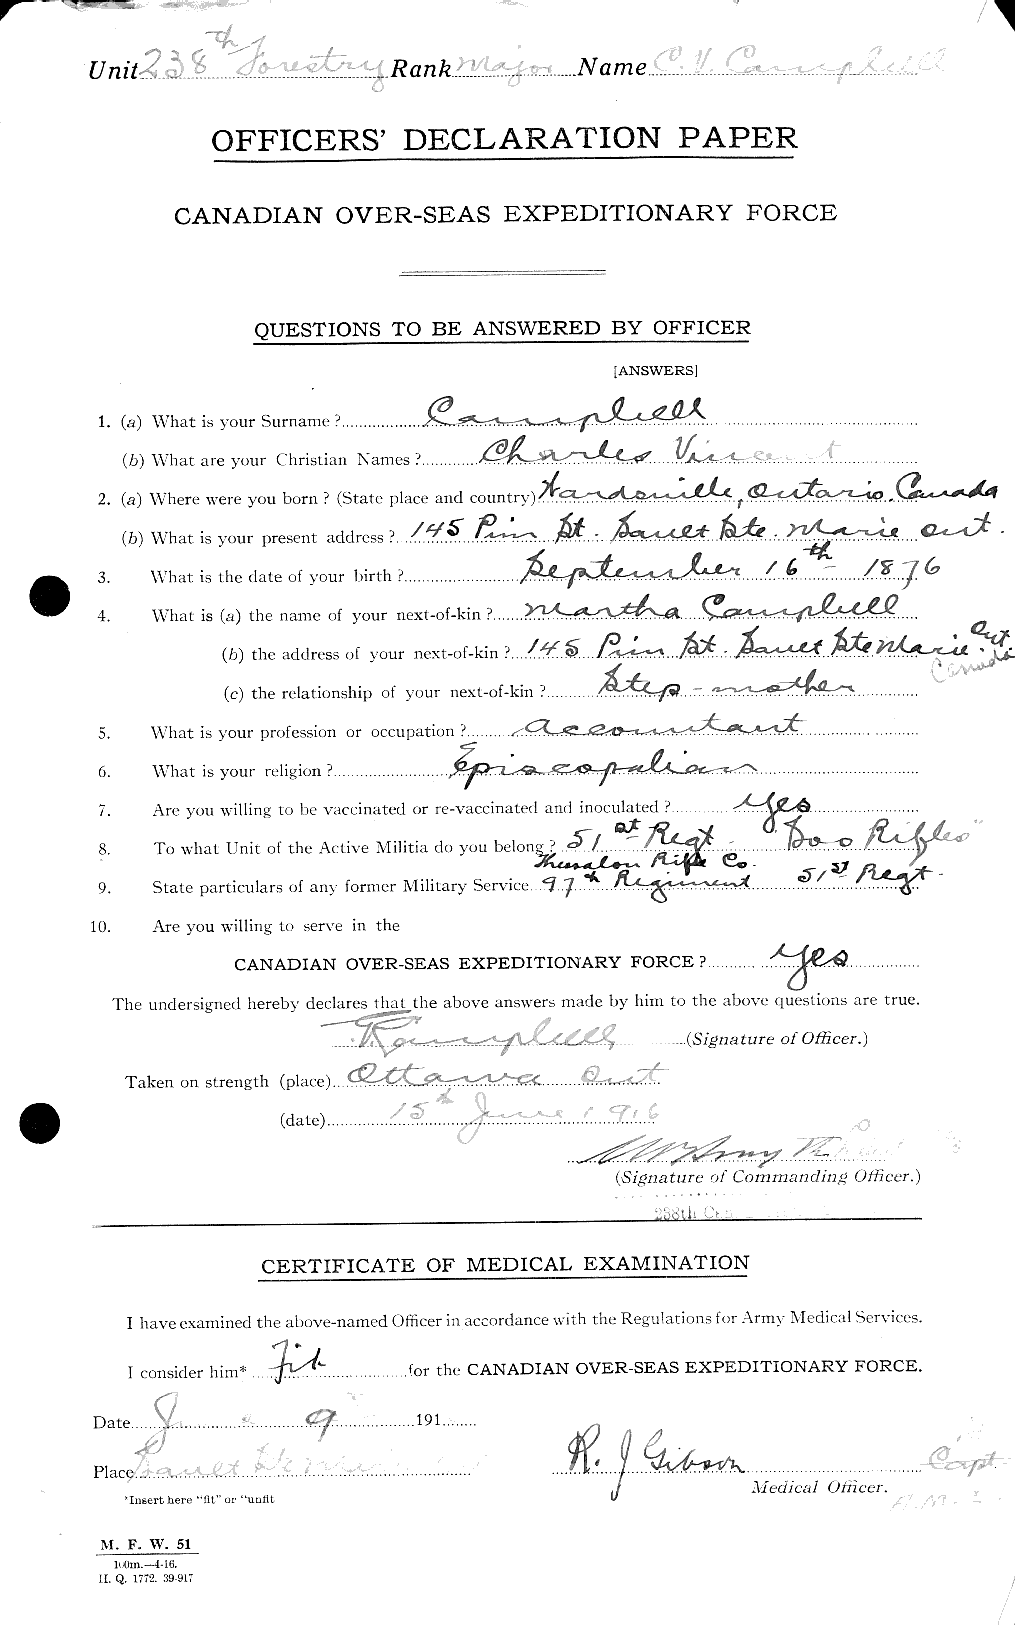 Personnel Records of the First World War - CEF 008078a